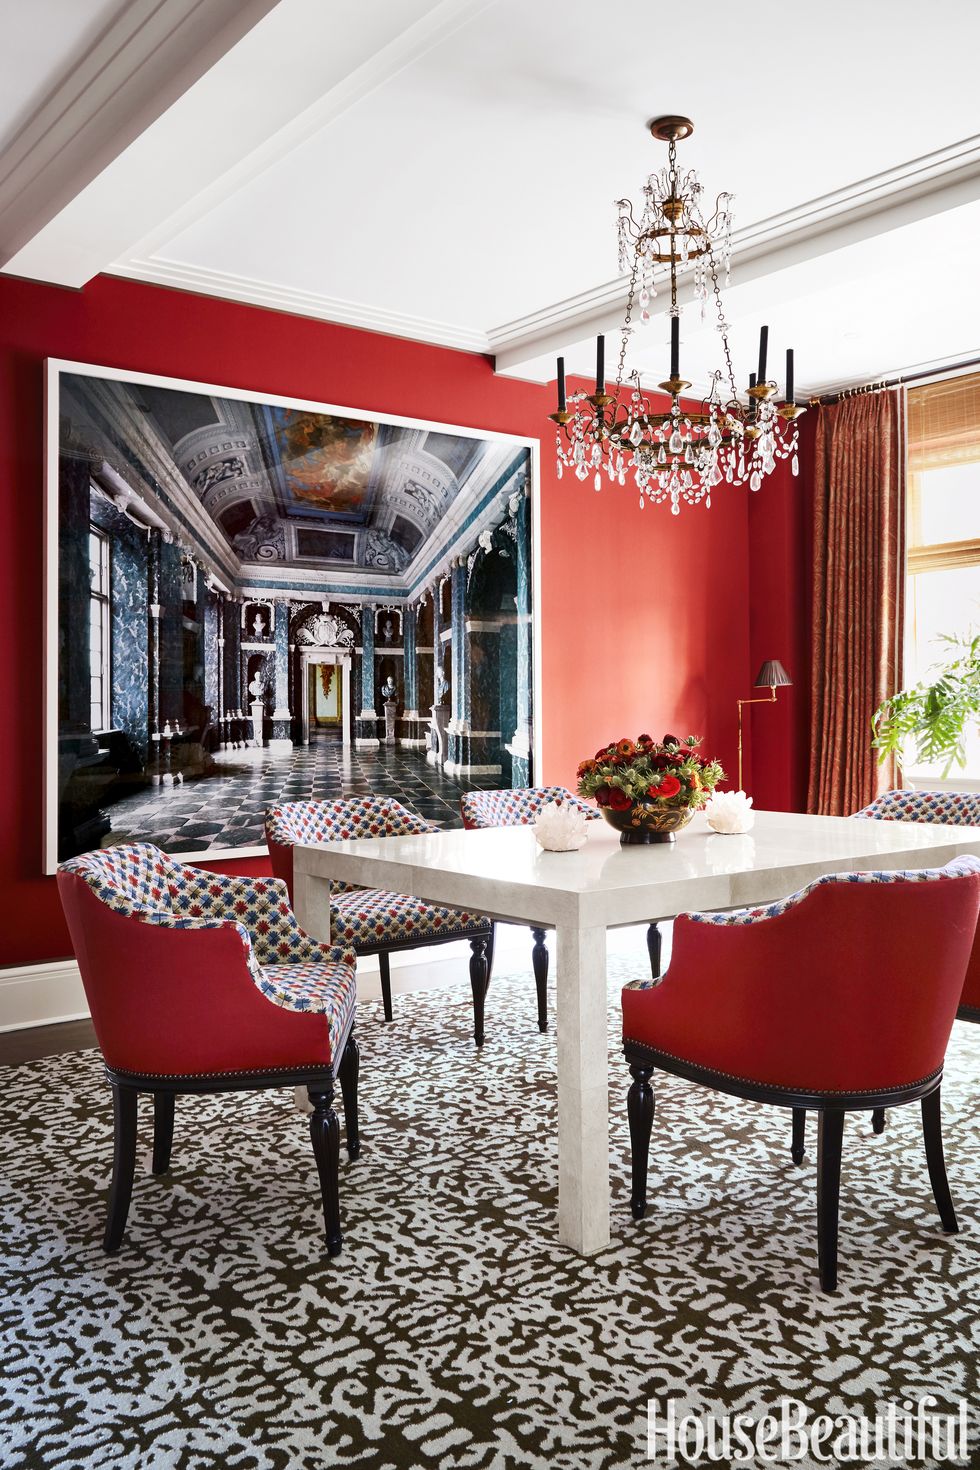 13 Different Shades of Red - Best Red Paint Colors